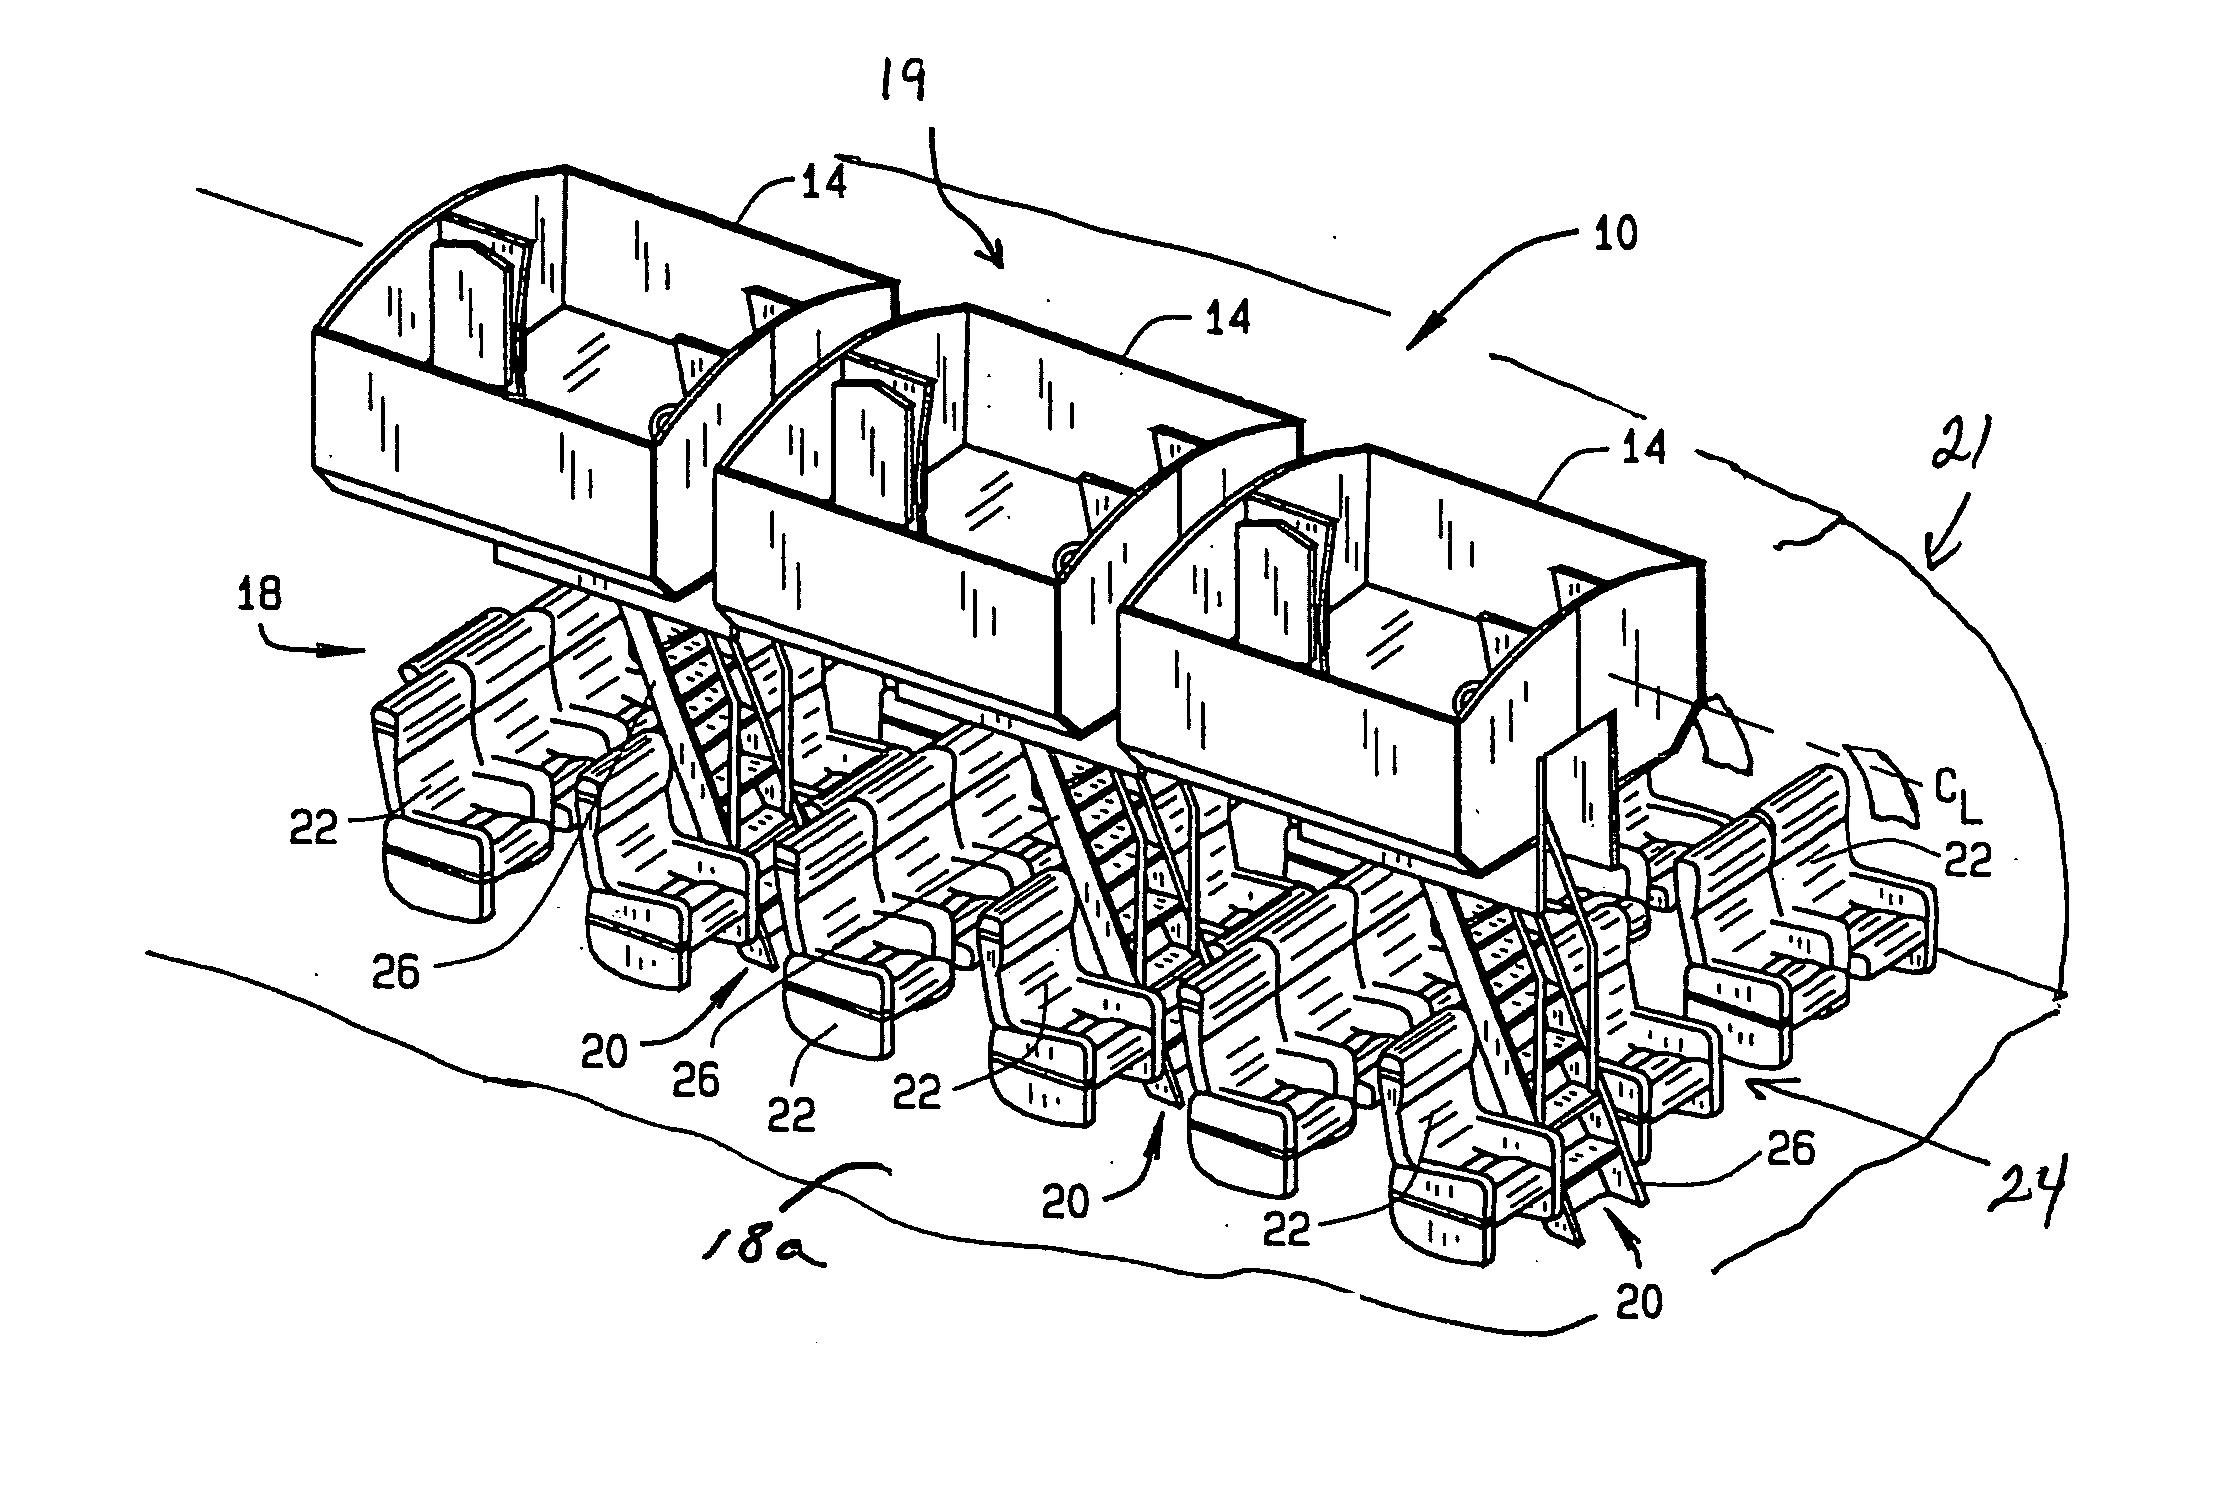 Modular overhead privacy system and method